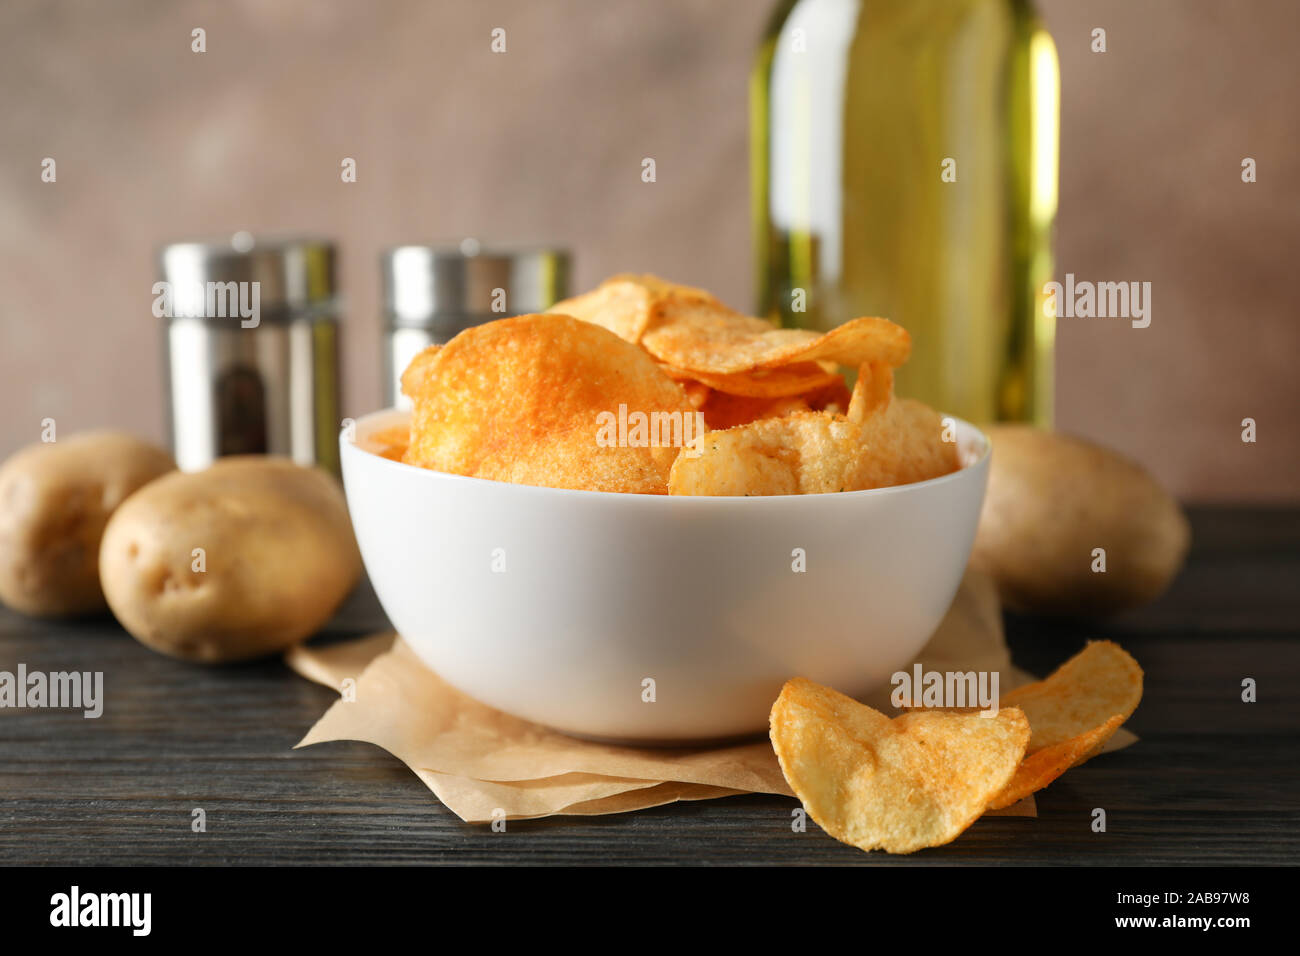 Potato chips in a bowl on craft paper. Potato, spice, olive oil on wooden background, space for text. Closeup Stock Photo